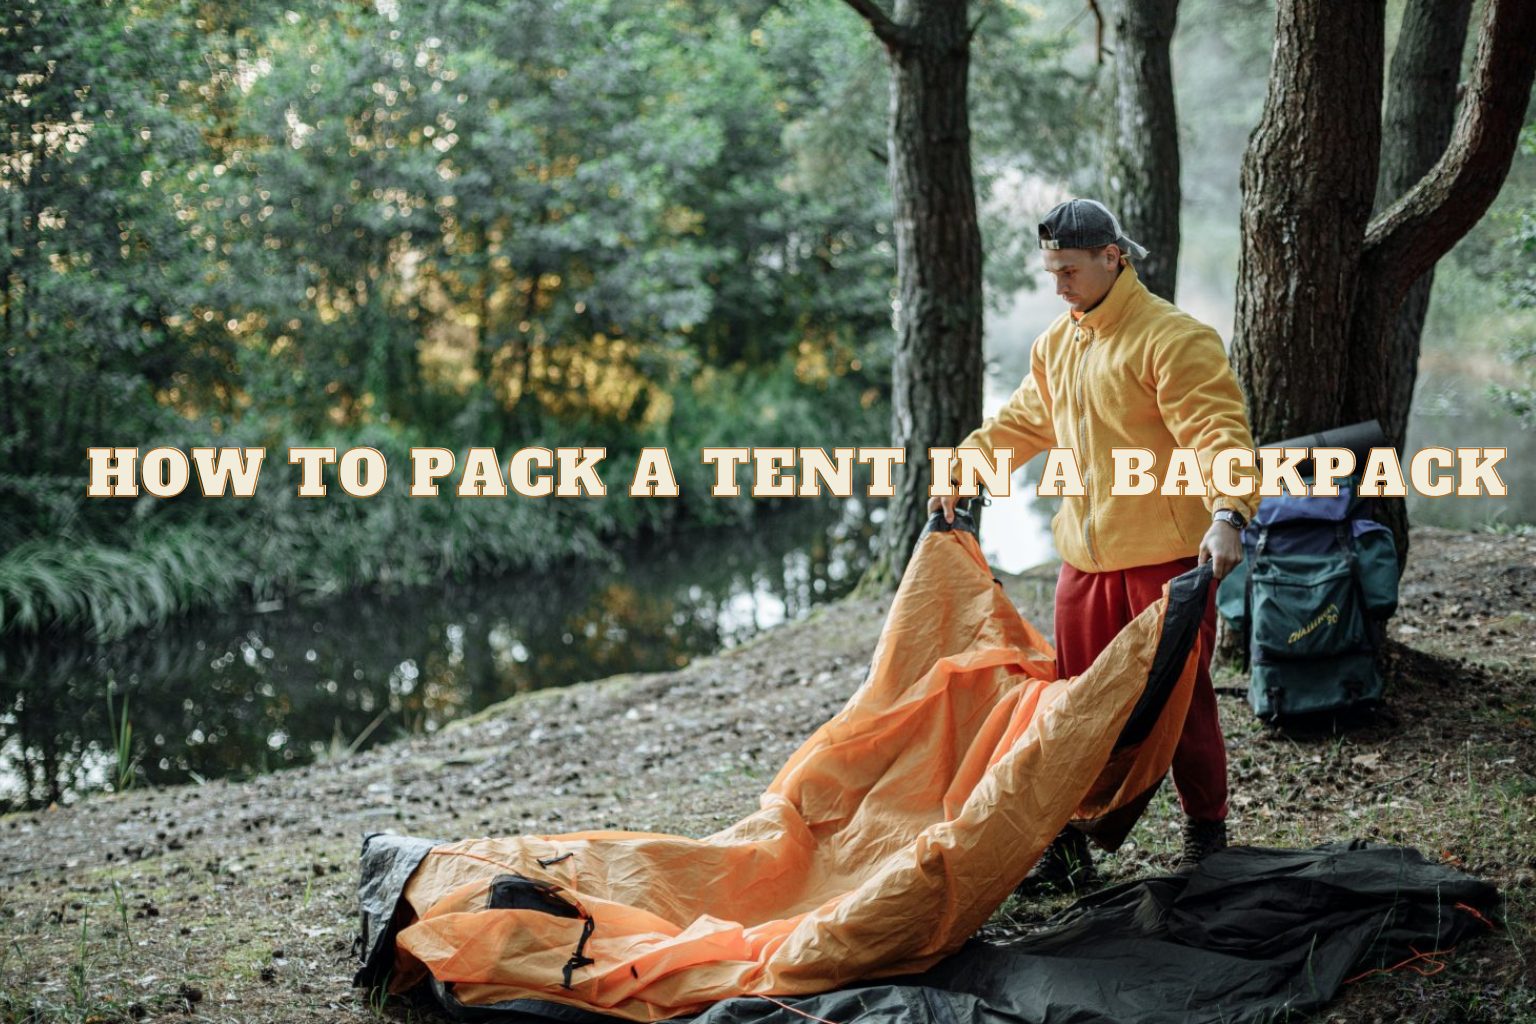 How to pack a tent in a backpack